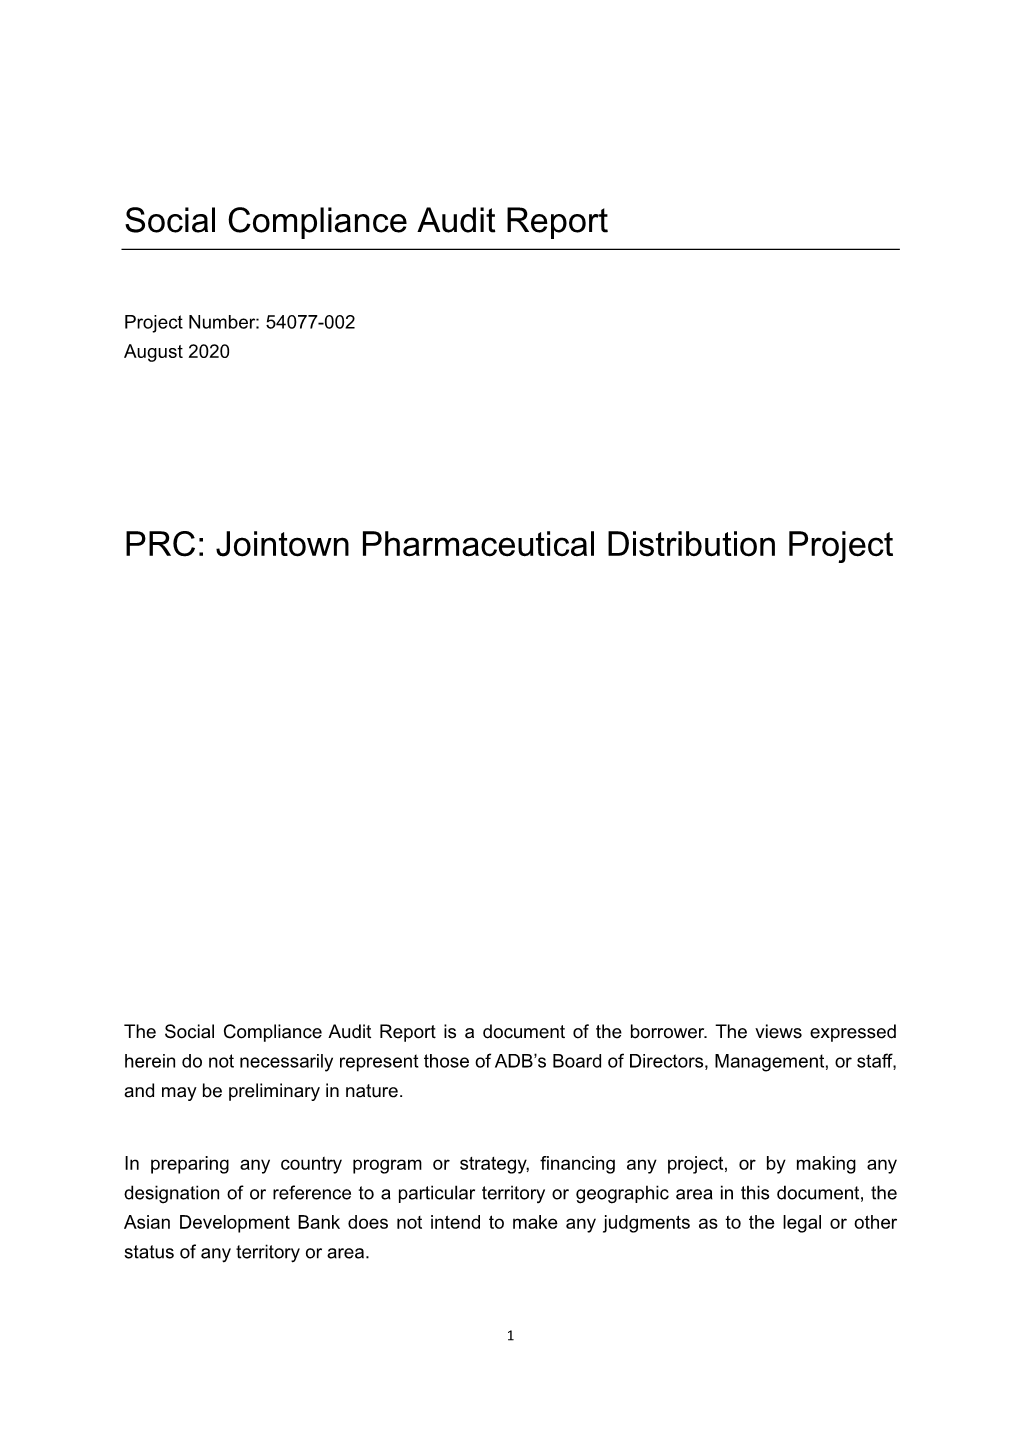 54077-002: Jointown COVID-19 Pharmaceutical Distribution Project